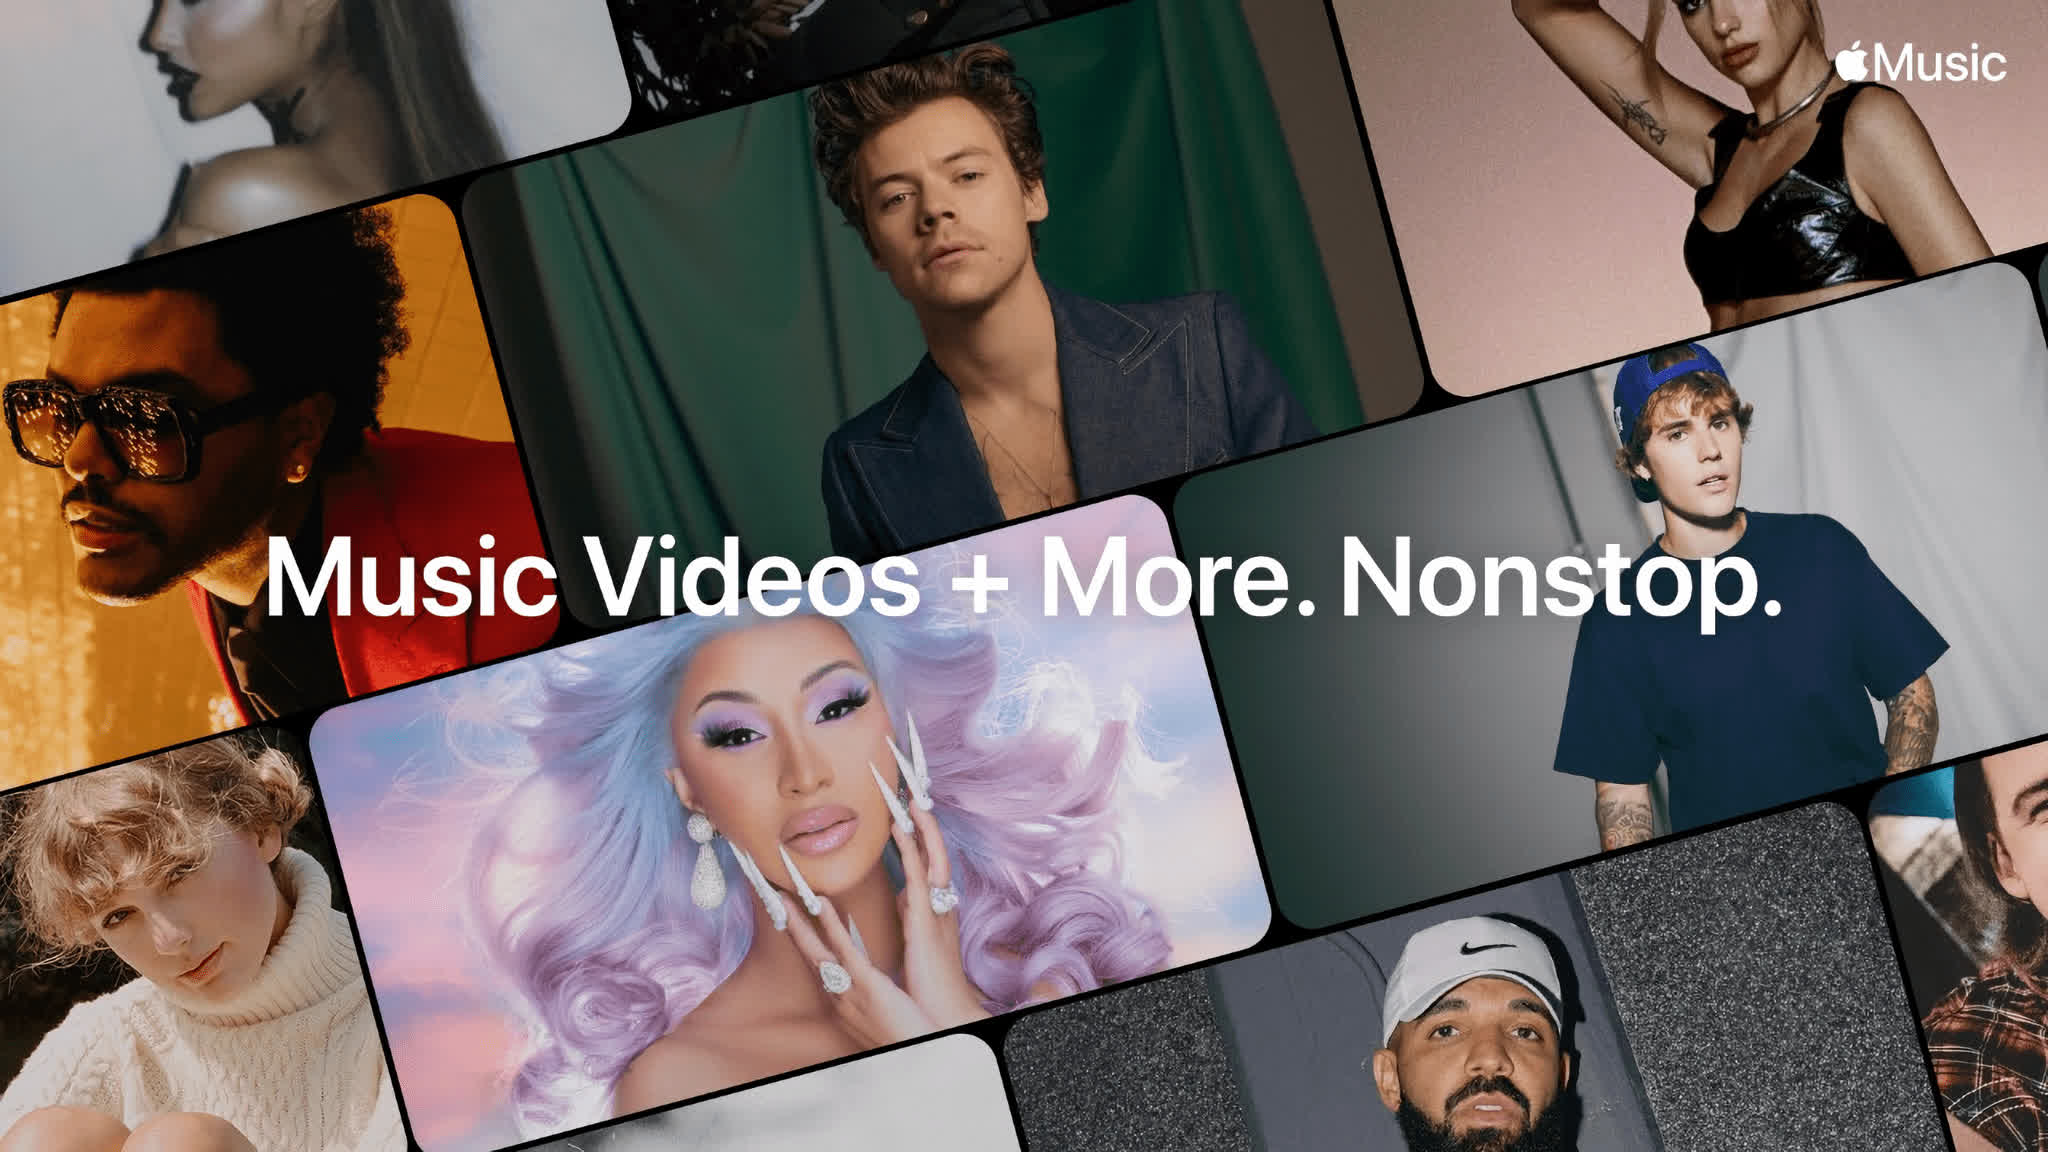 Apple's new 24-hour curated music video streaming service is MTV for the modern era